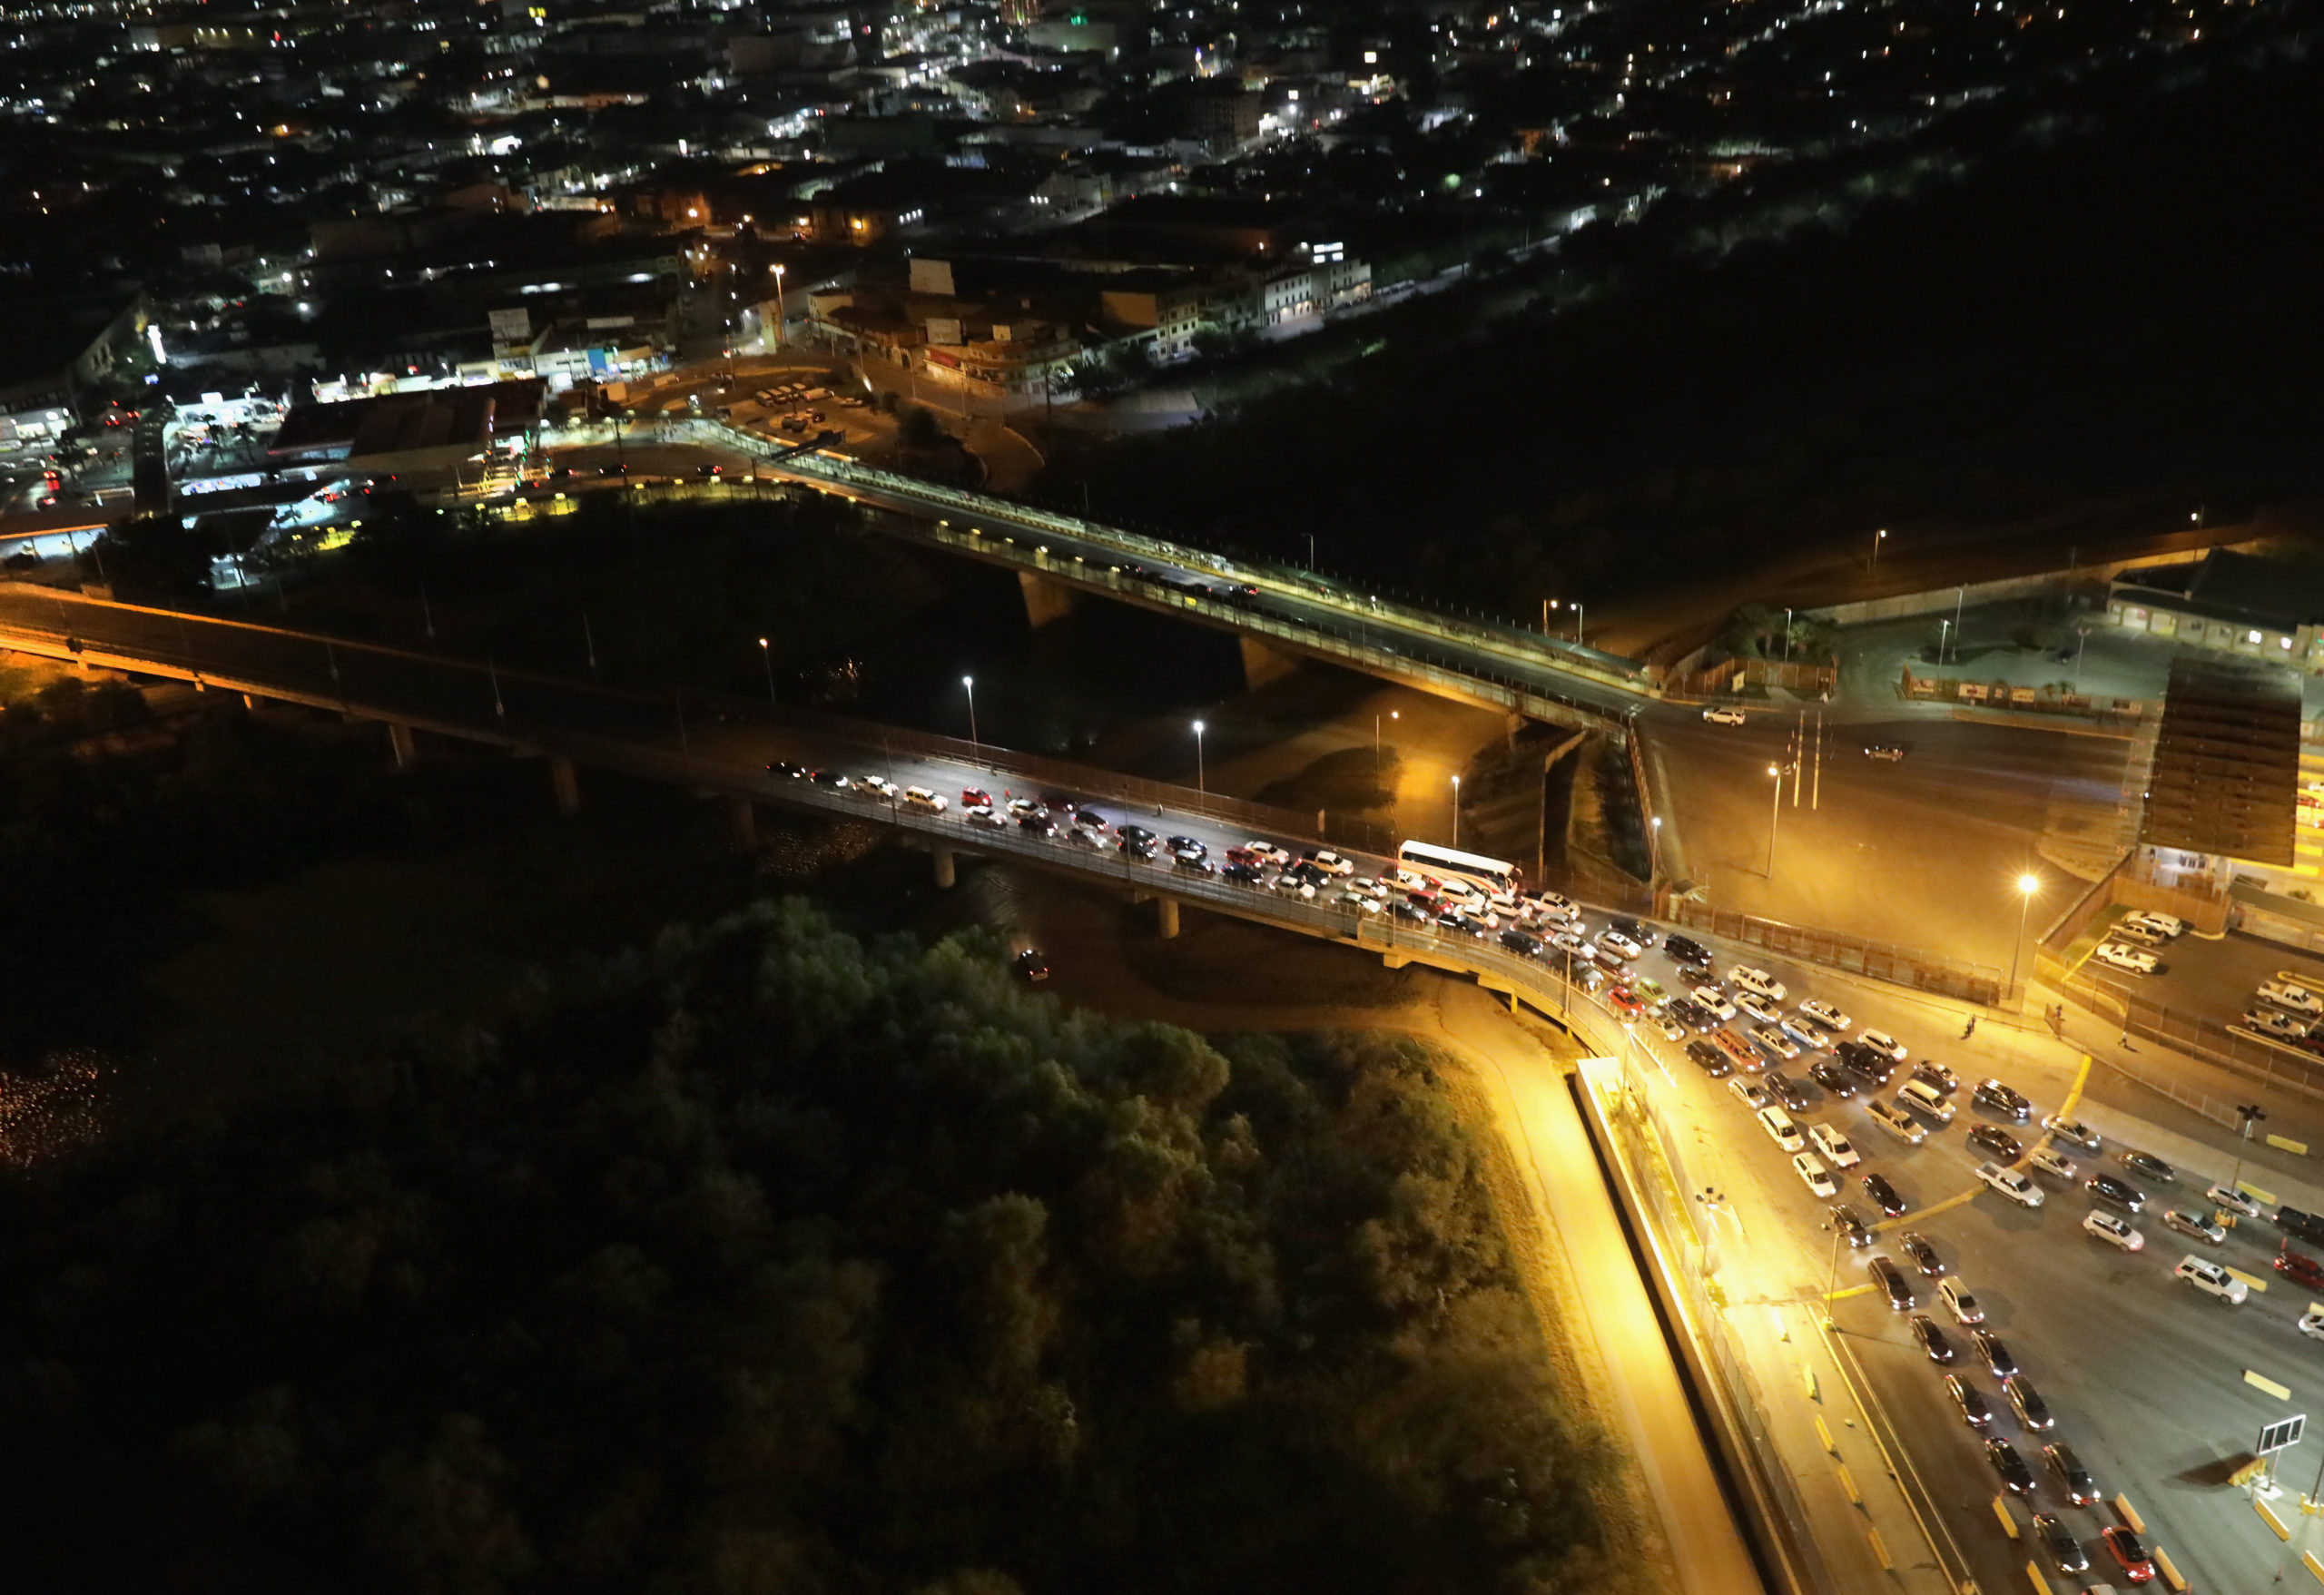 HIDALGO, TX - NOVEMBER 06: Vehicles wait in line to enter the United States after crossing the international bridge from Mexico (L), on November 6, 2018 in Hidalgo, Texas. The U.S. Army, as part of "Operation Faithful Patriot" set up razor wire at the Hidalgo port of entry last week, ahead of the possible arrival of the migrant caravan in upcoming weeks. The soldiers are expected to "harden" additional border crossings as part of their deployment to the southern border. (Photo by John Moore/Getty Images)